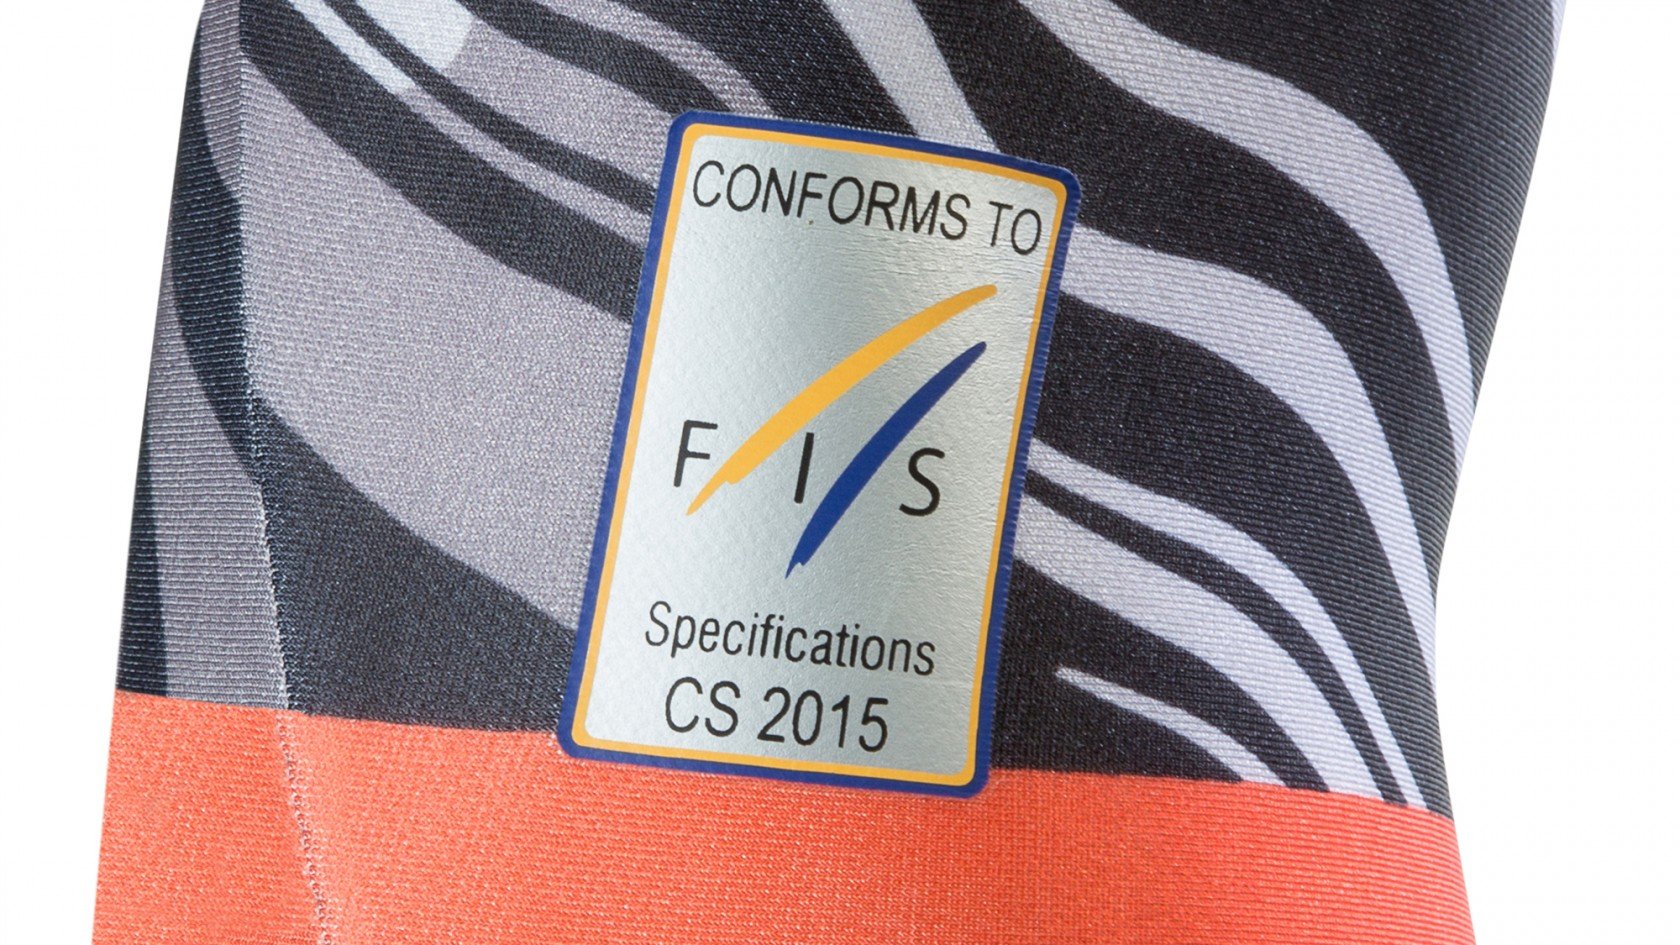 FIS CS 2015 conformity label proving a ski race suit is FIS approved.